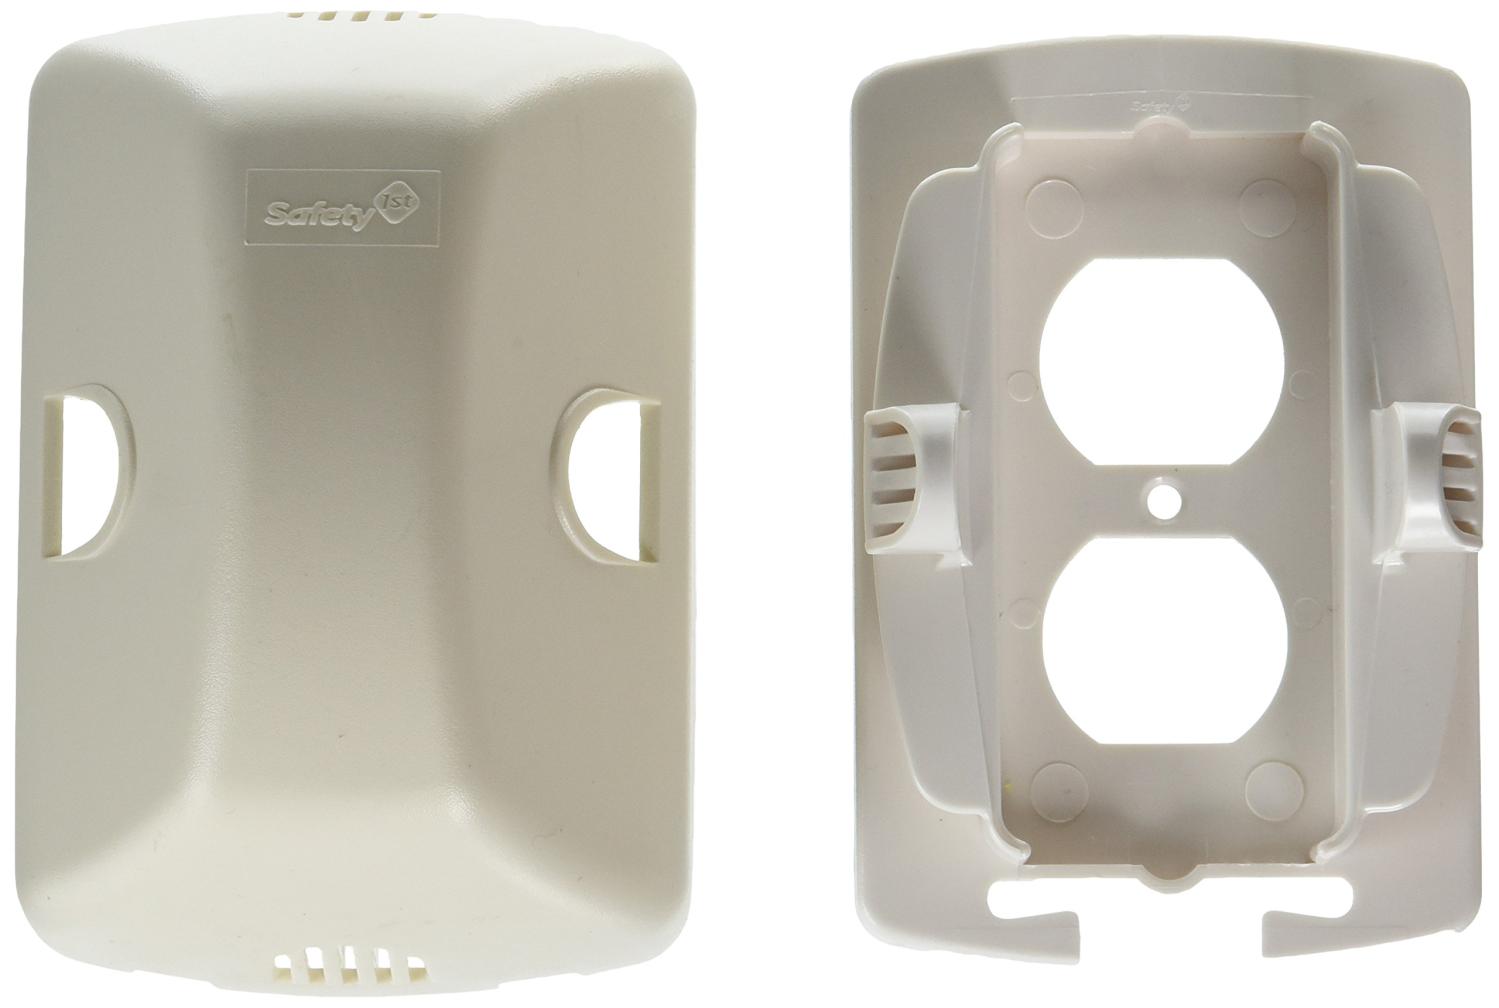  Safety 1st Outlet Cover with Cord Shortener for Baby